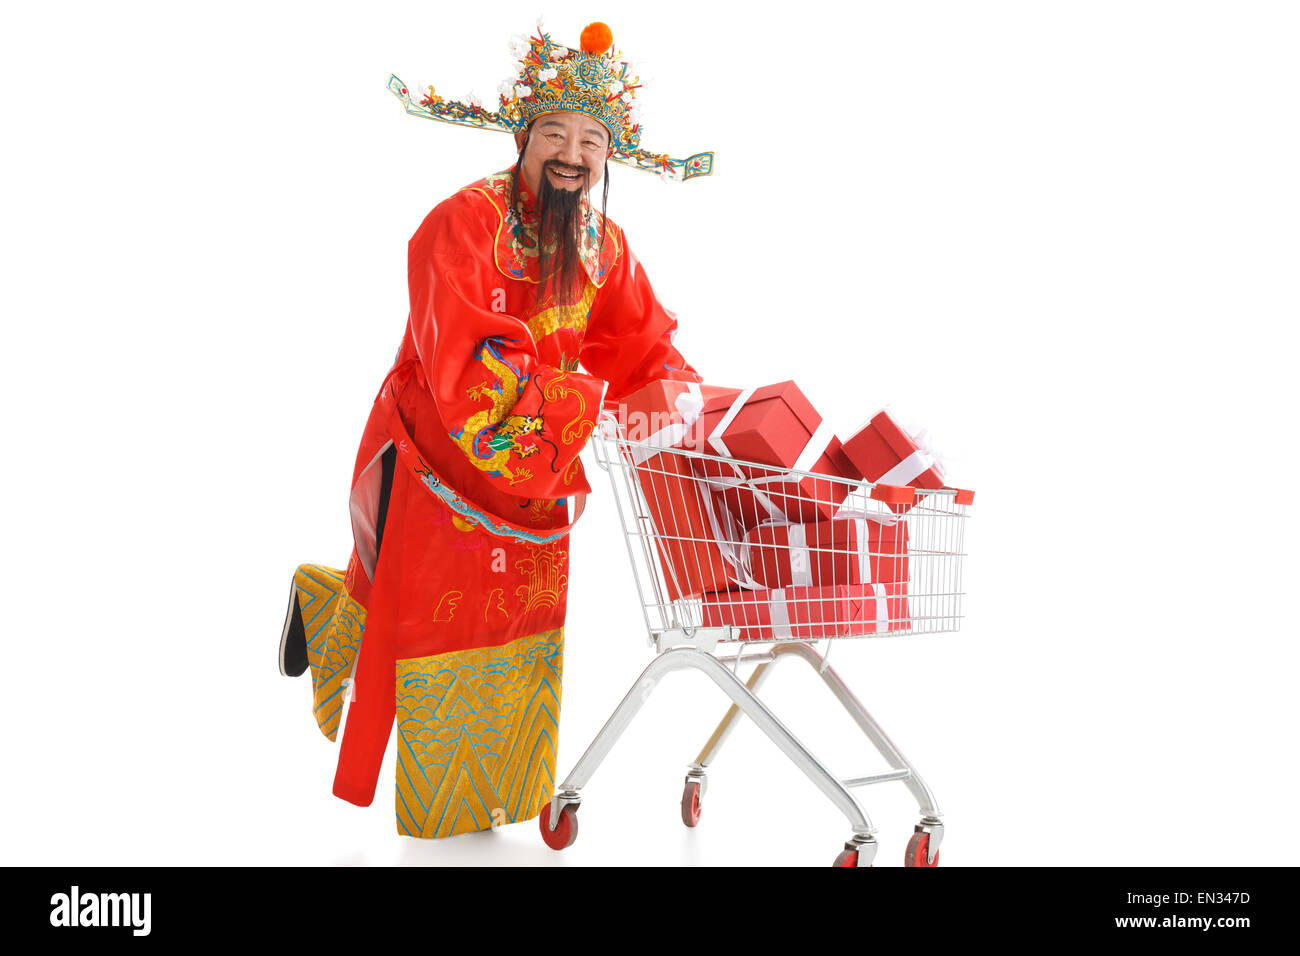 The God of wealth is pushing a shopping cart Stock Photo